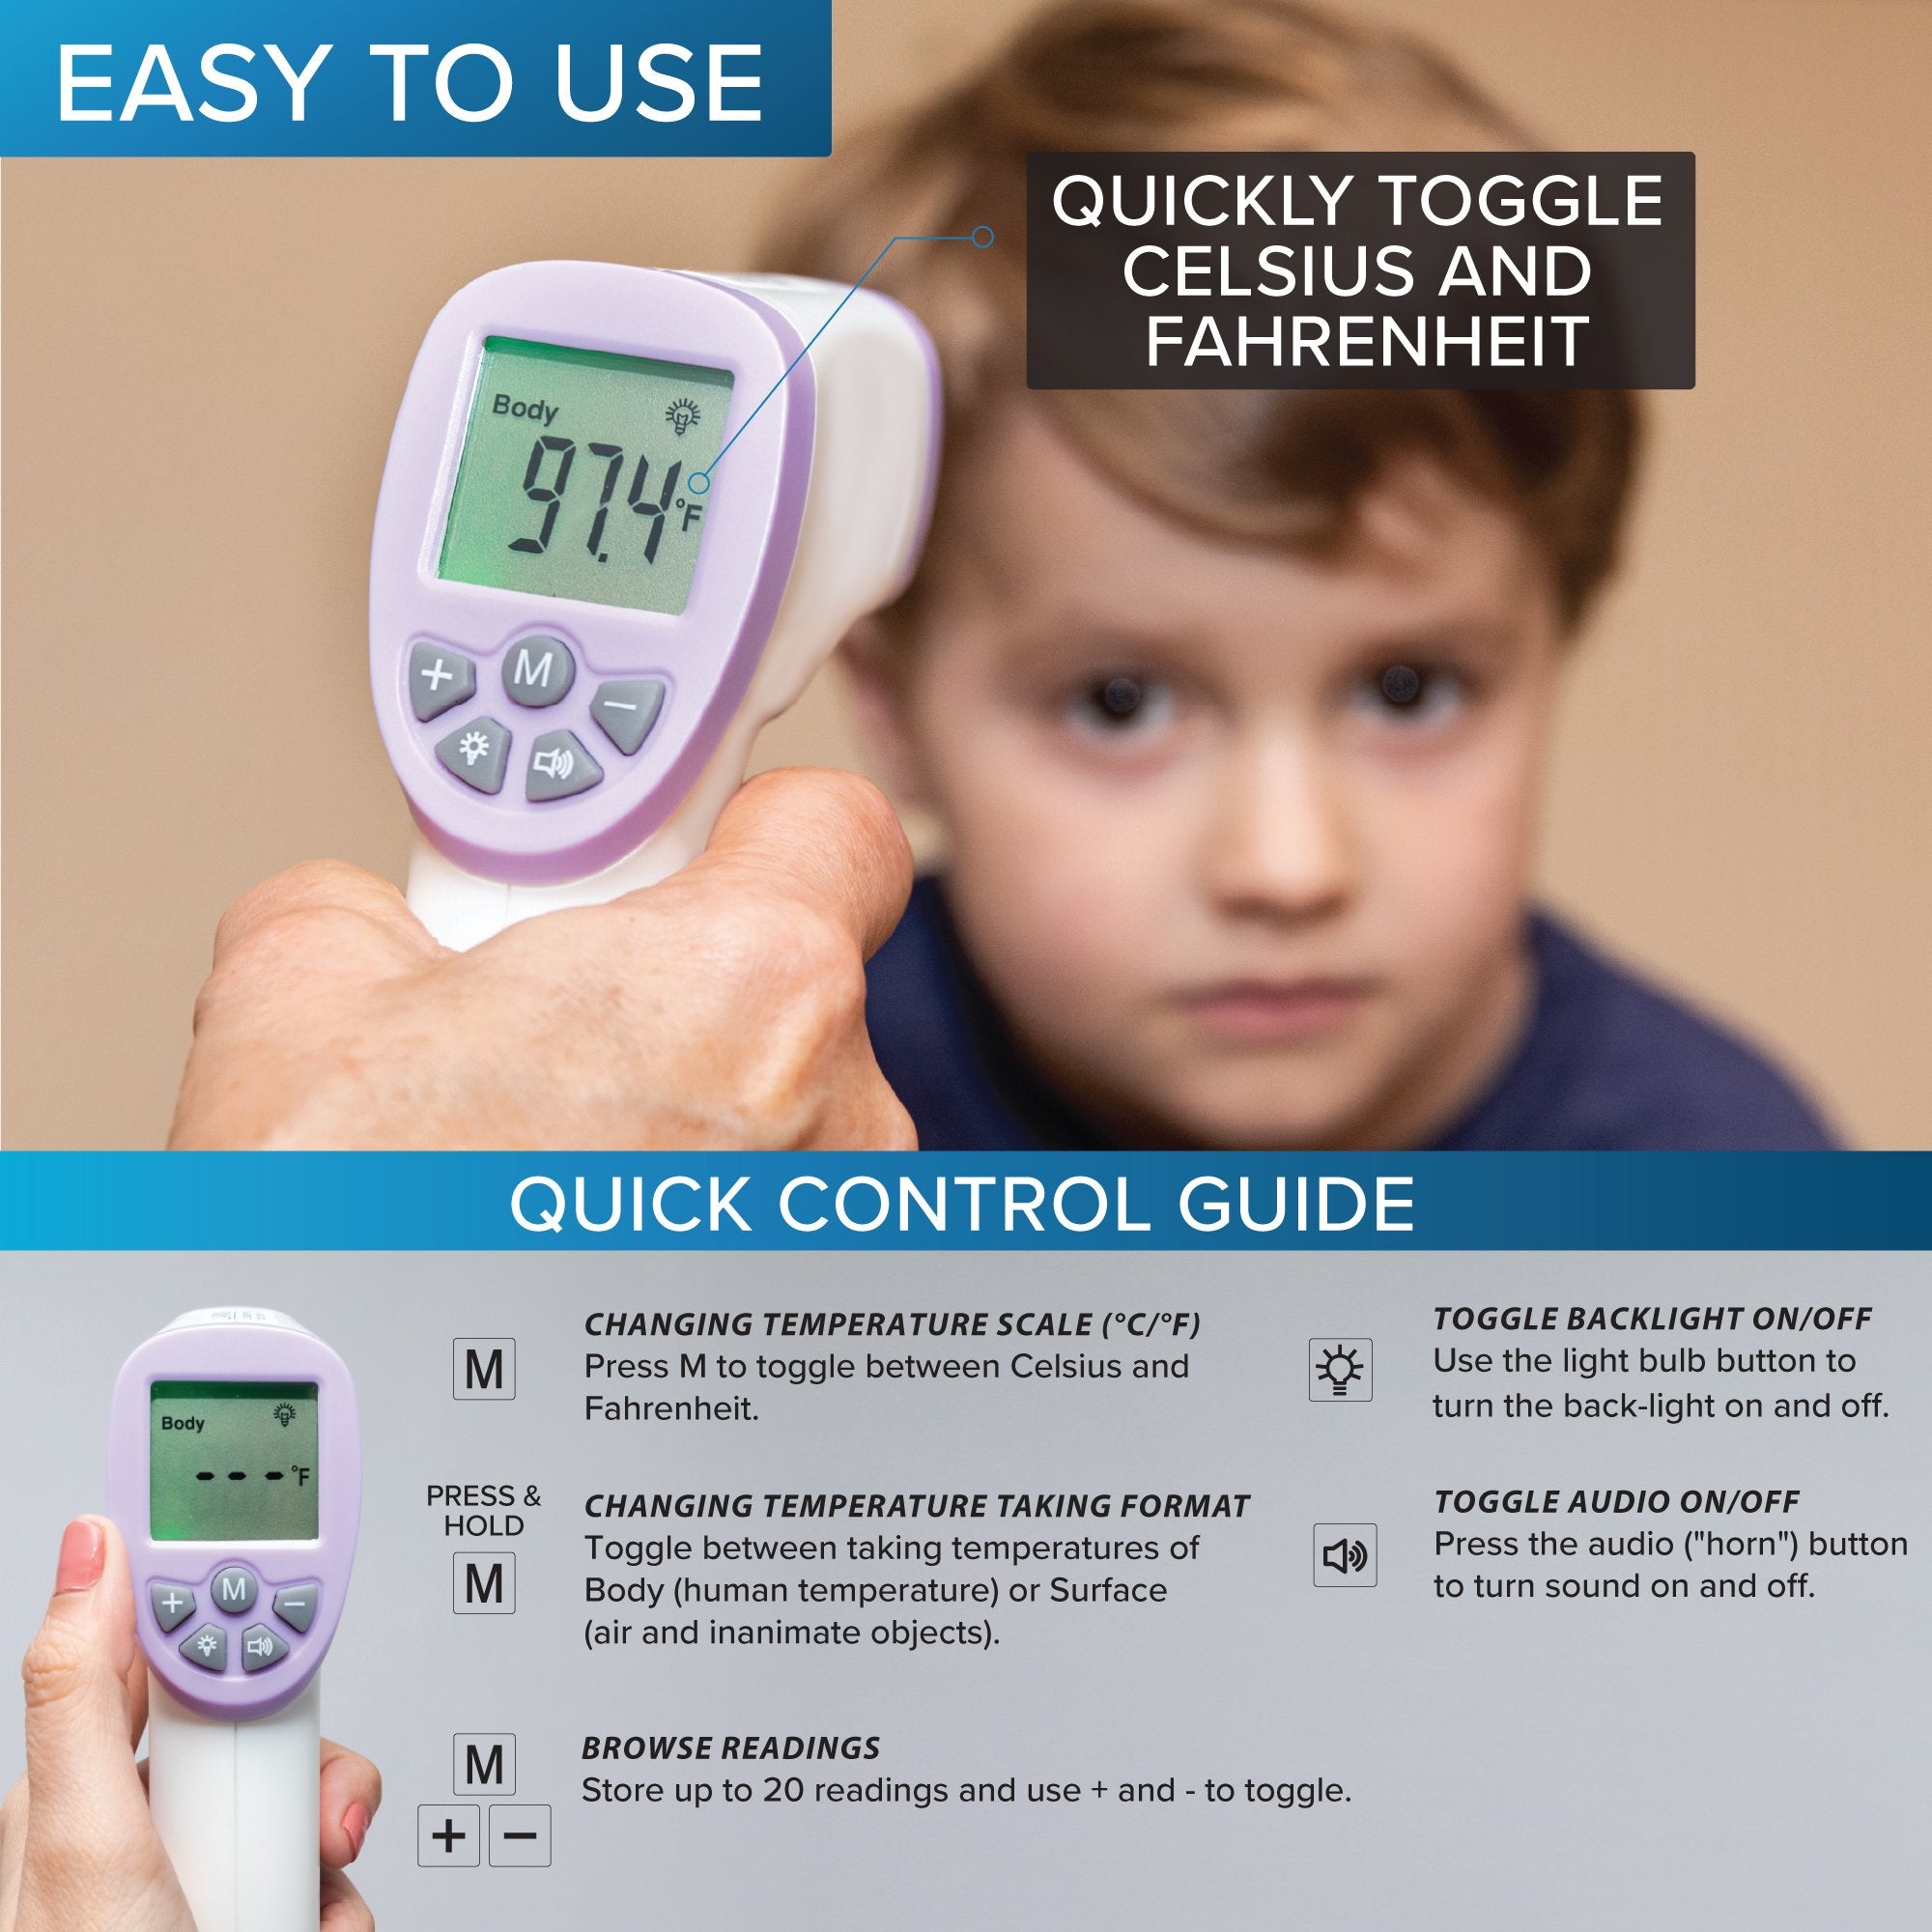 Infrared Surface Thermometers